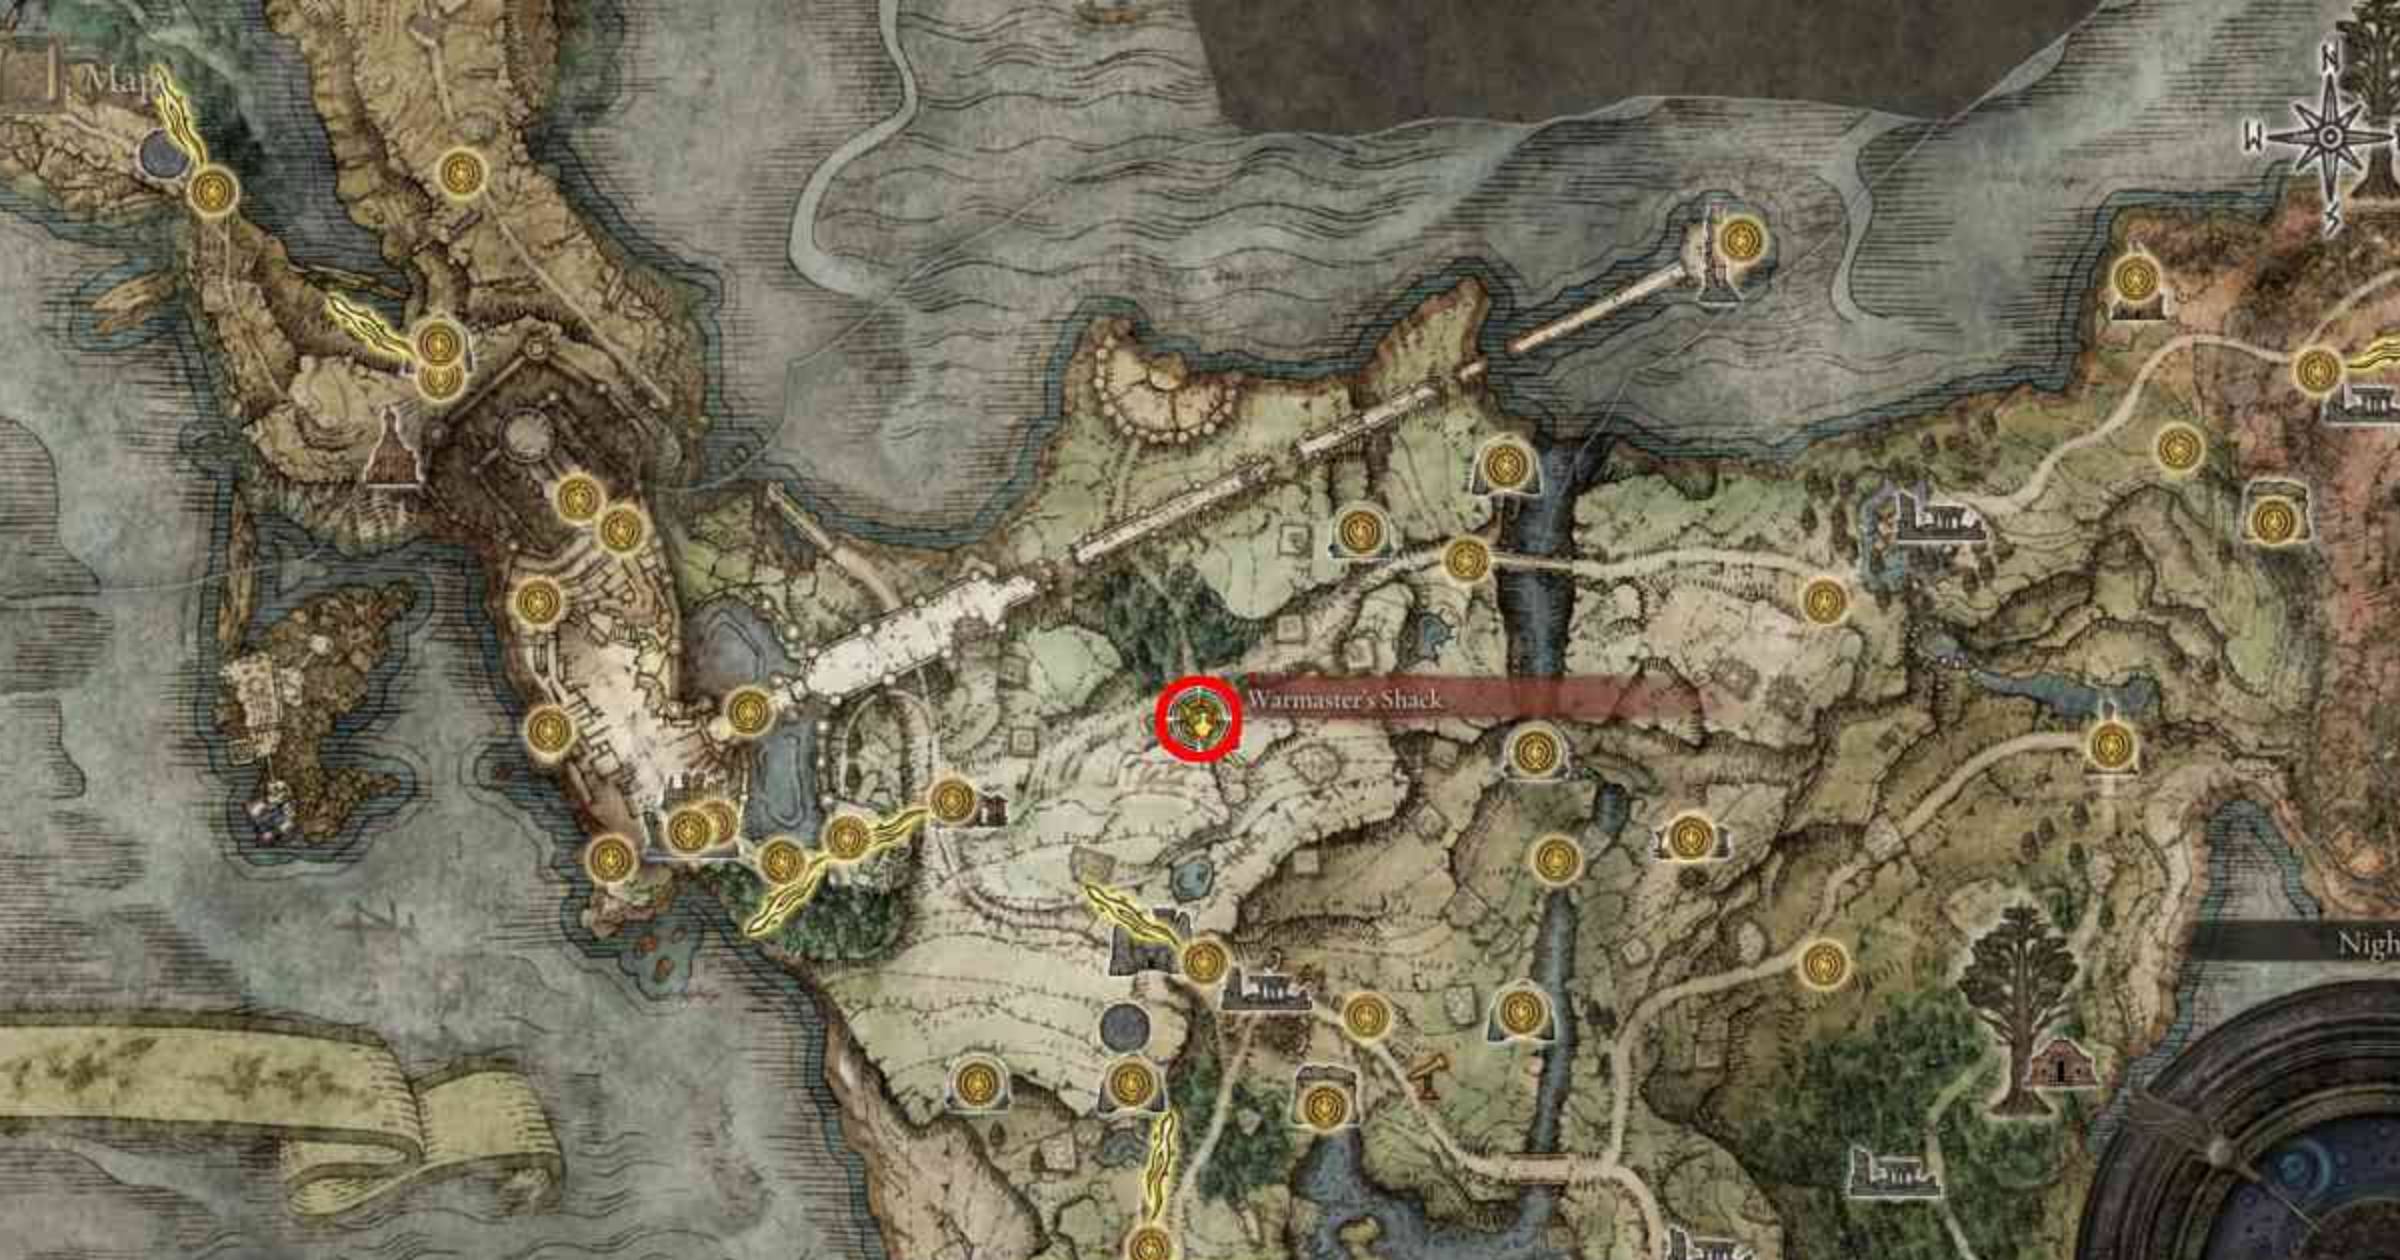 Elden Ring: The Best Rune Farming Locations To Help You Level Up